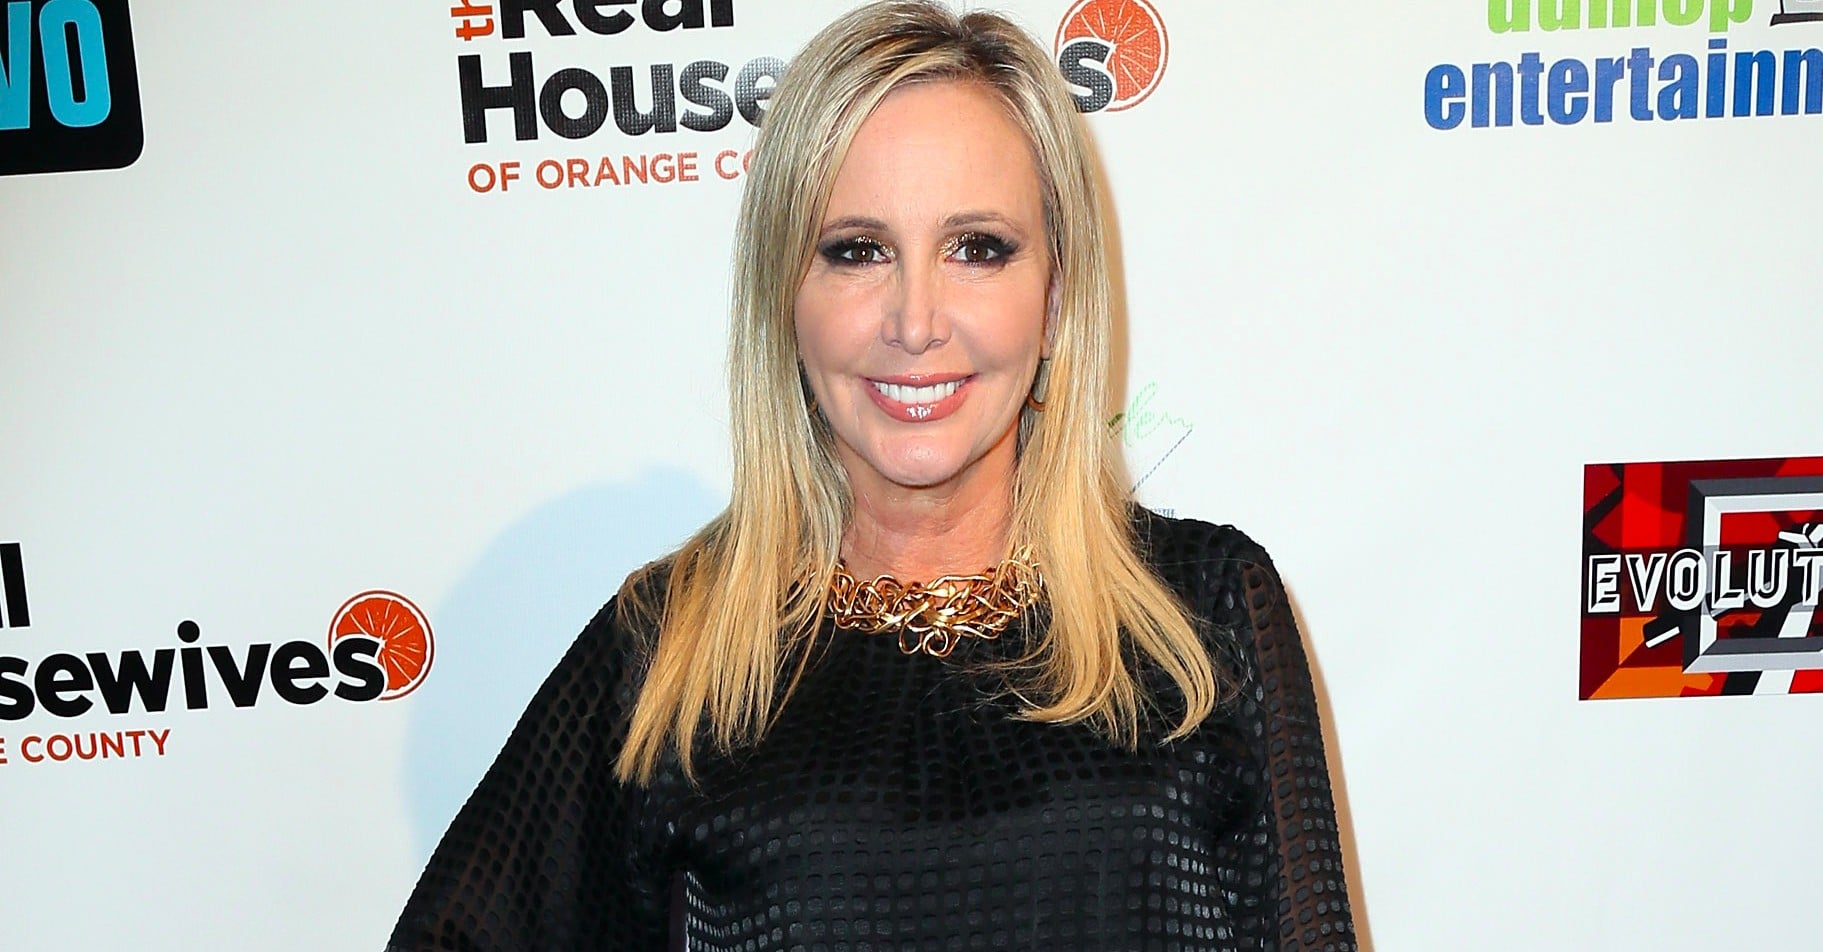 Pictures of Shannon Beador's House | POPSUGAR Home